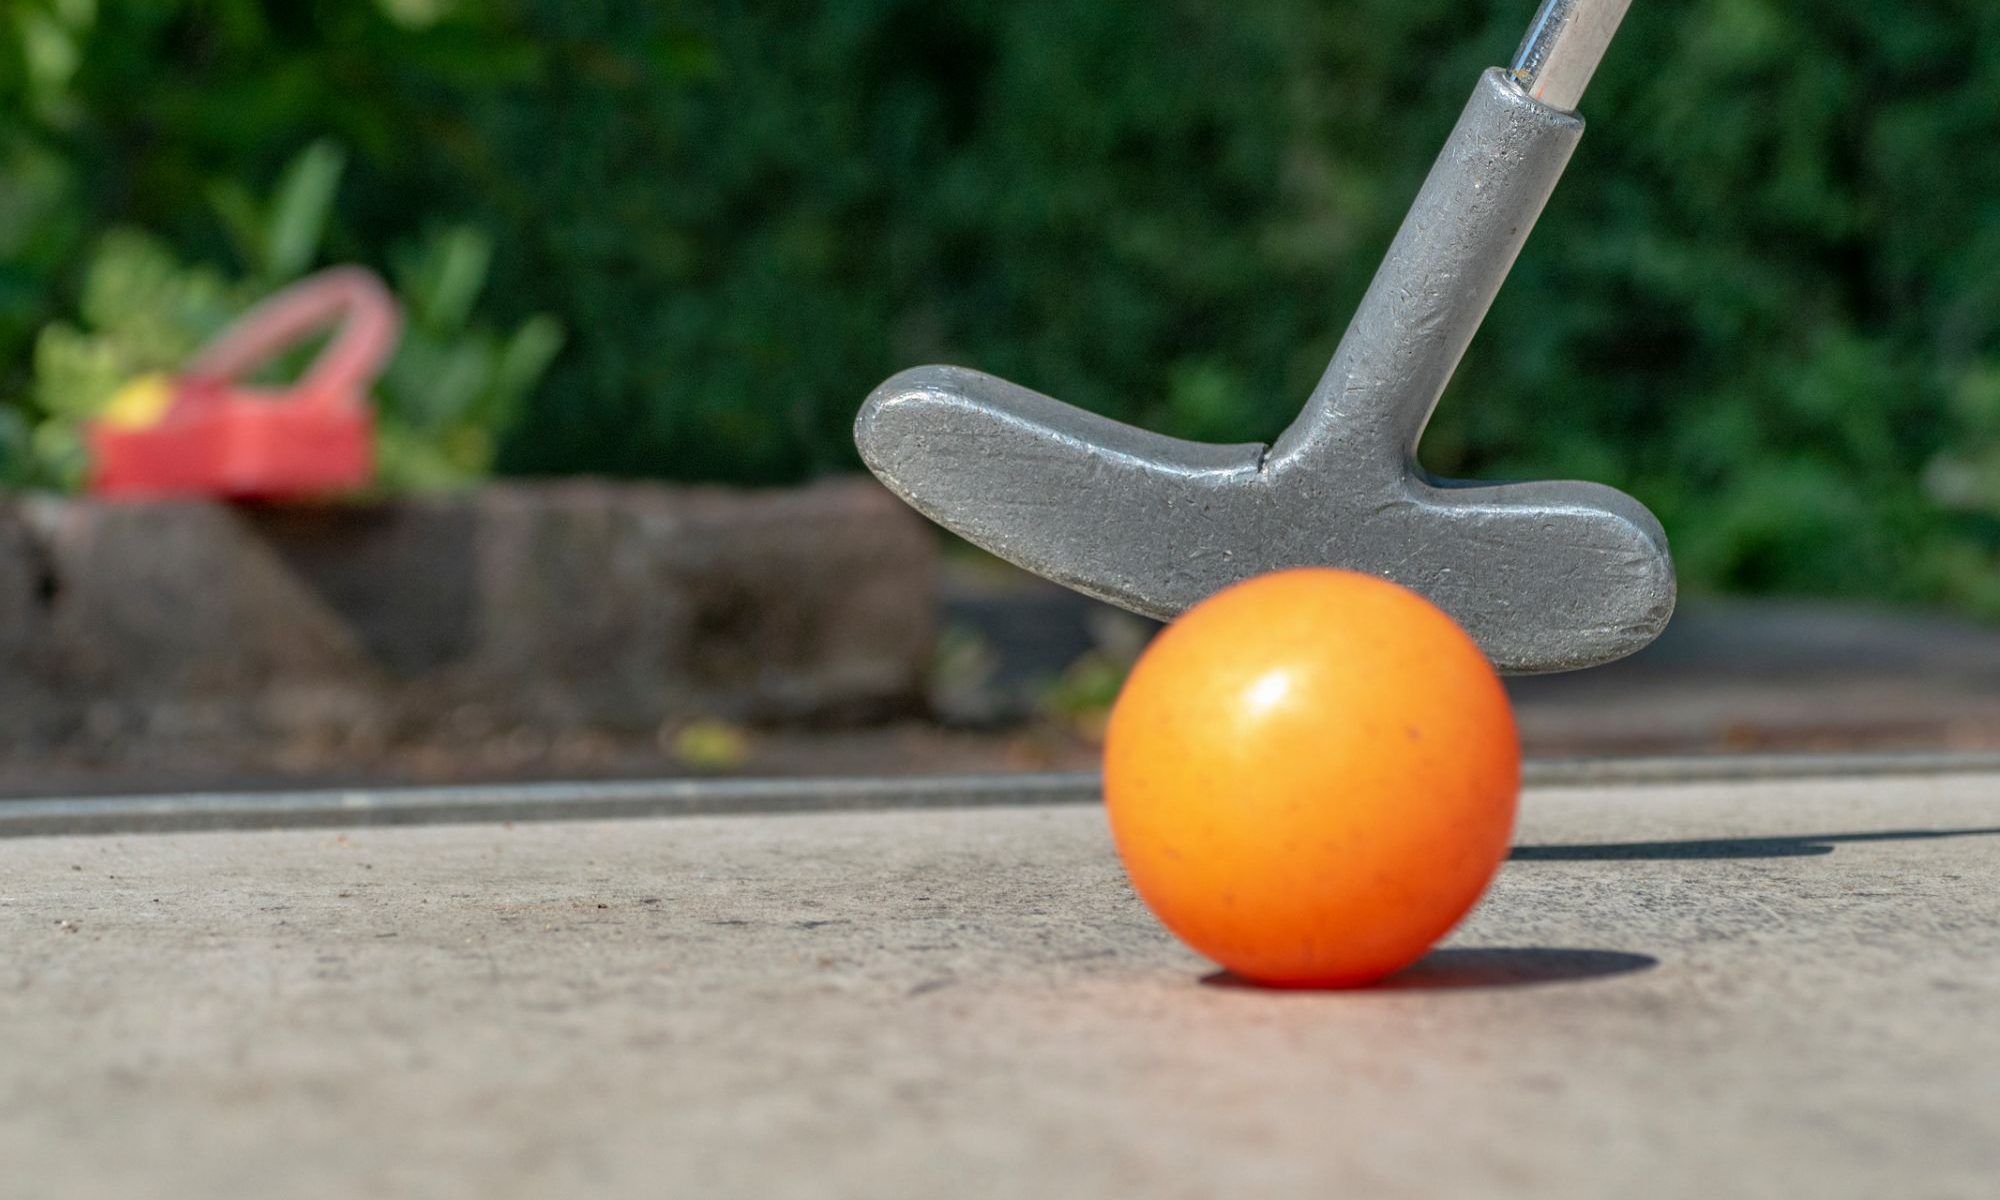 Mini golf ball and putter on a course at the beach. Ball is orange. Putter is silver color